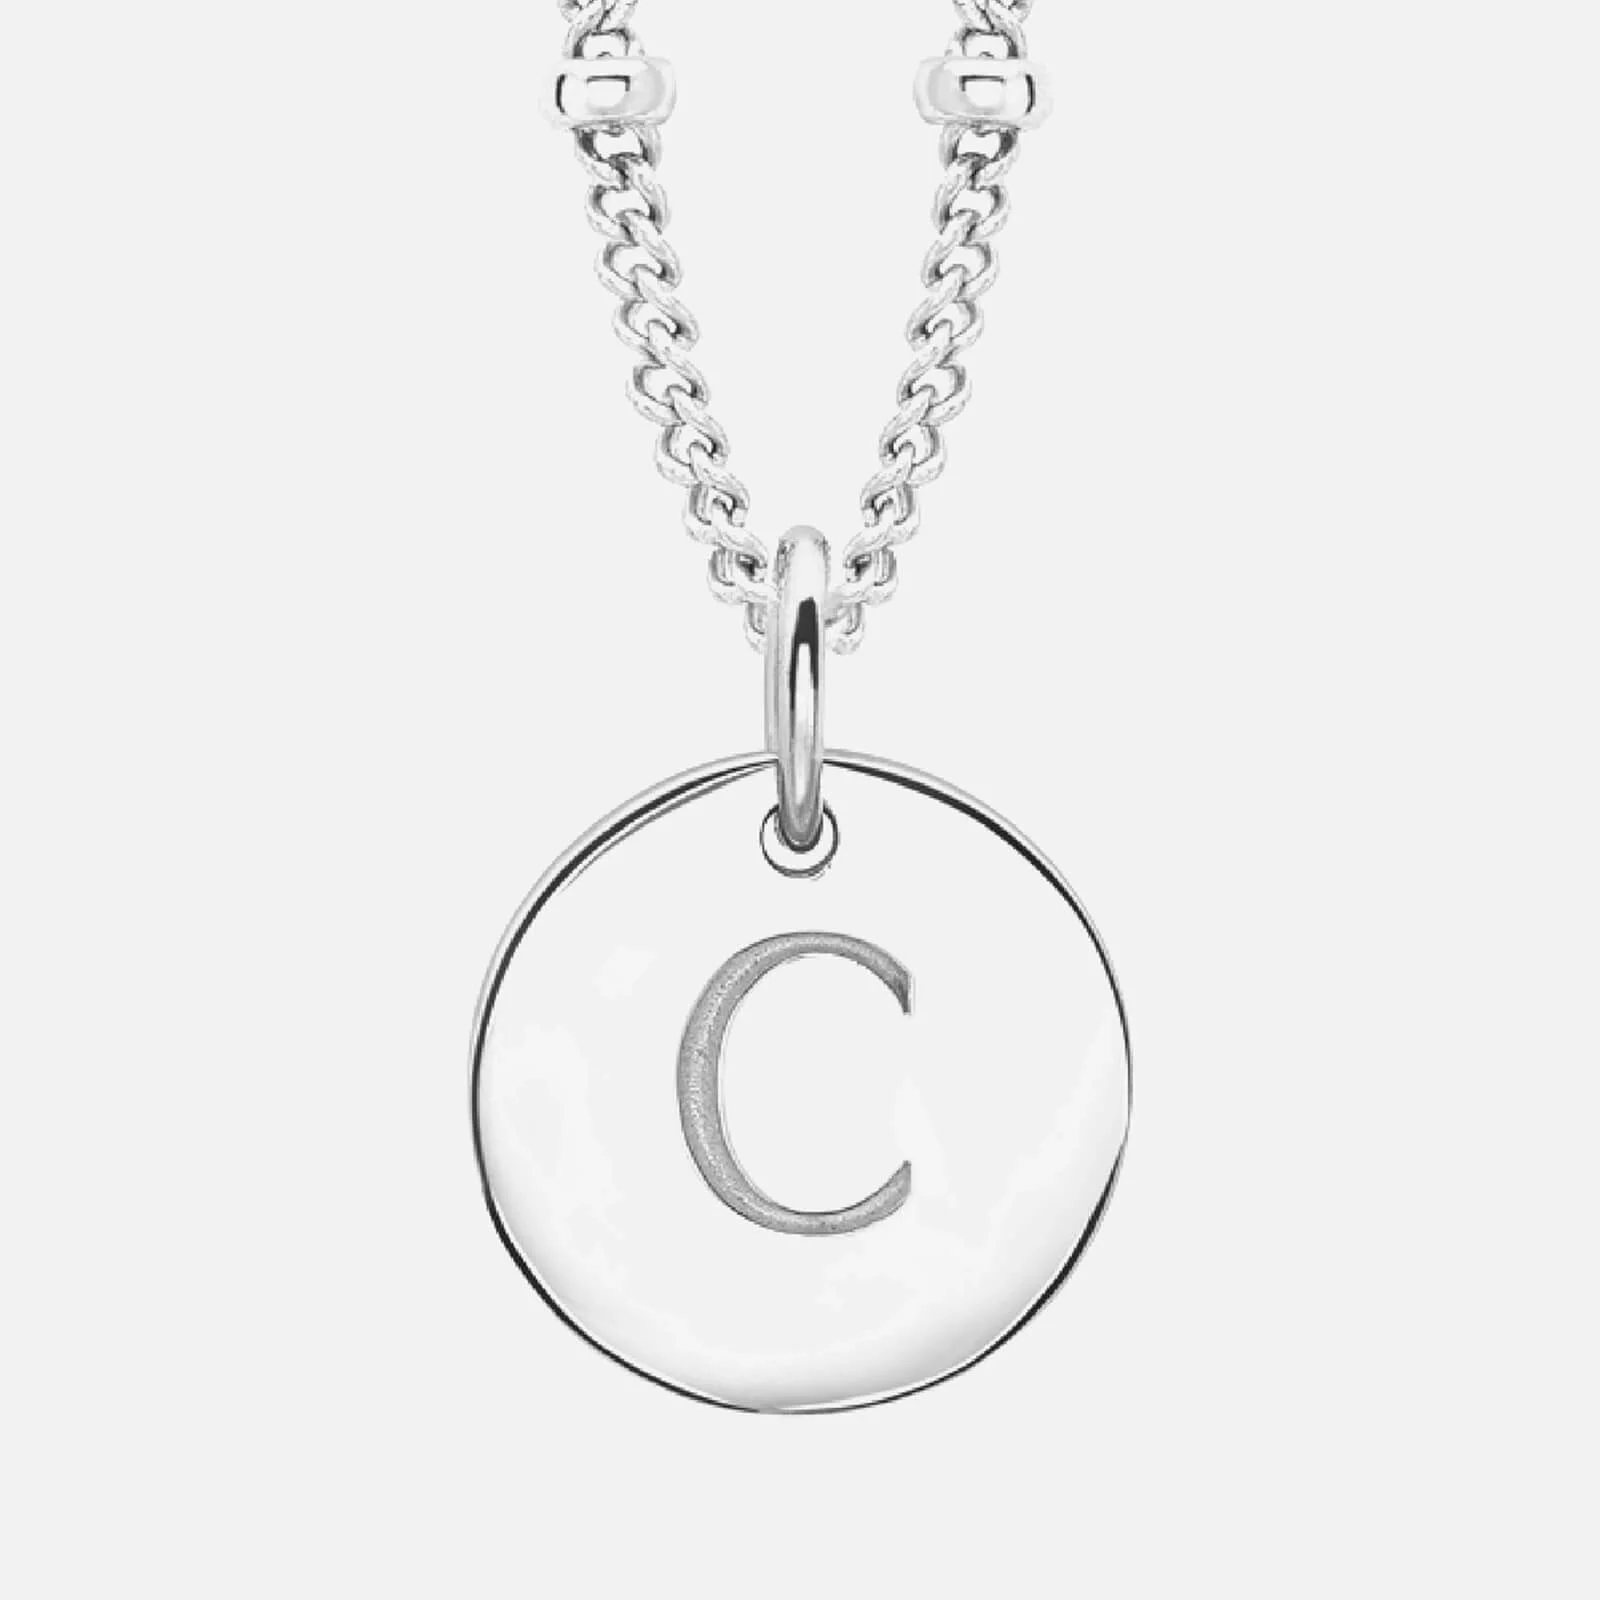 Missoma Women's Initial Charm Necklace - C - Silver Image 1